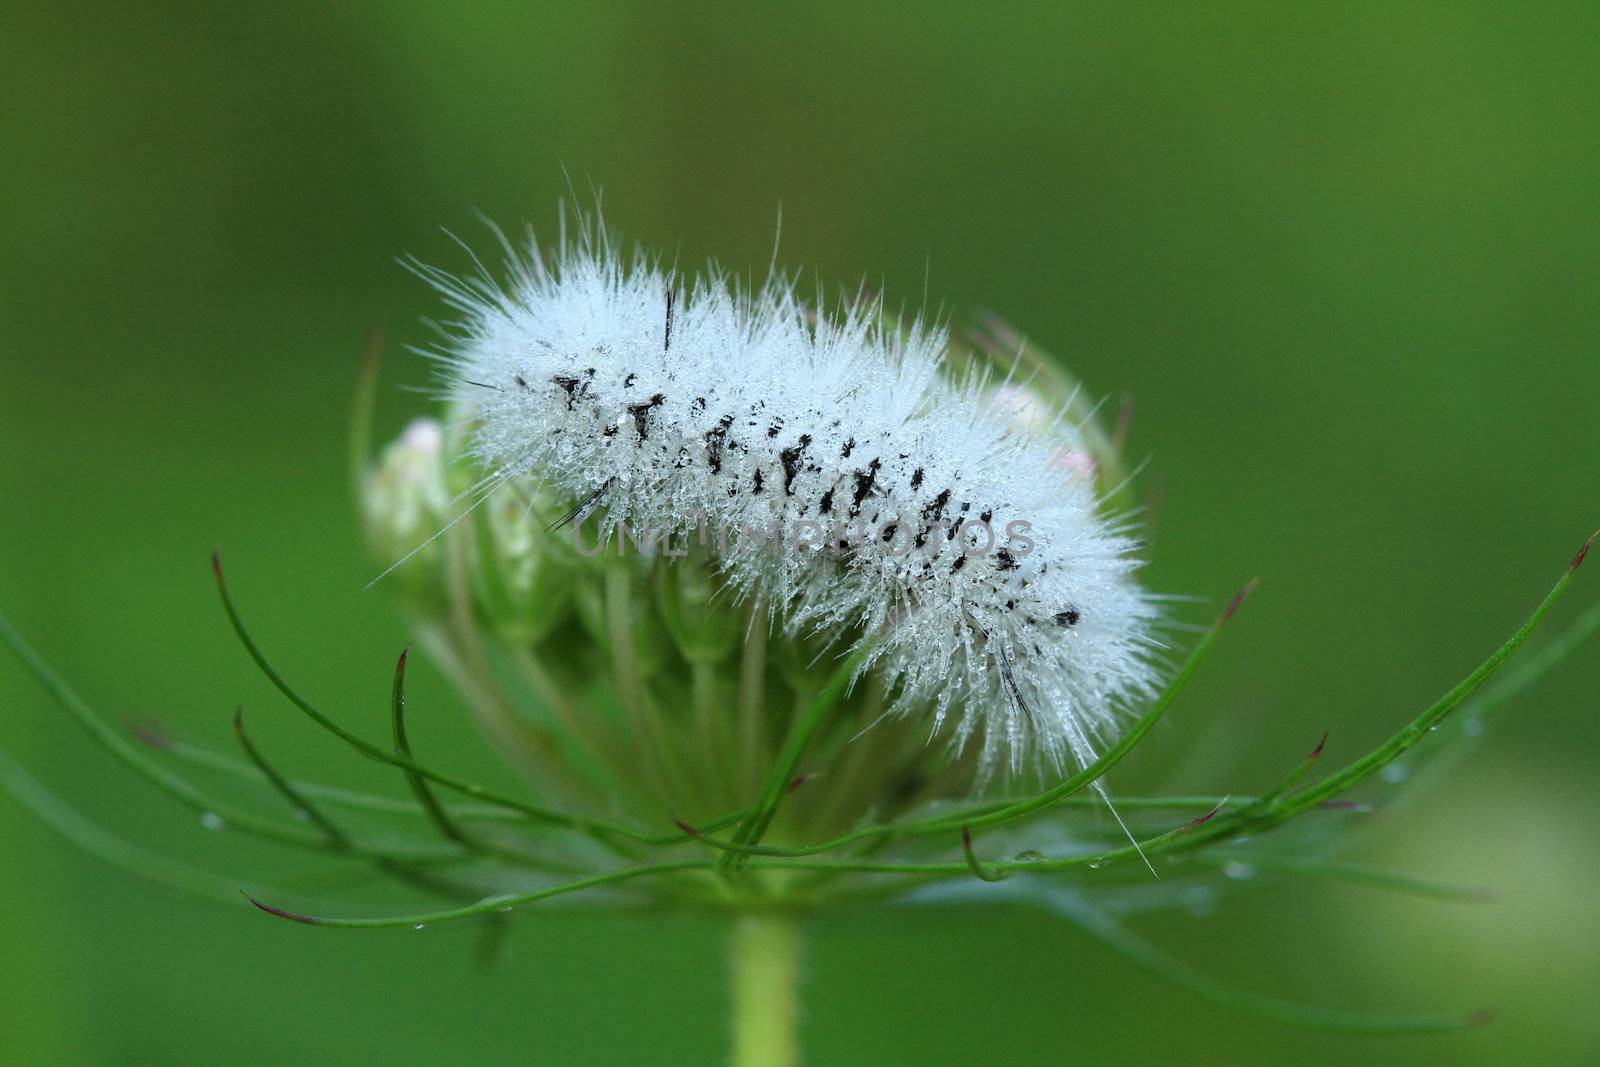 Hickory Tussock Moth caterpillar early morning with dew